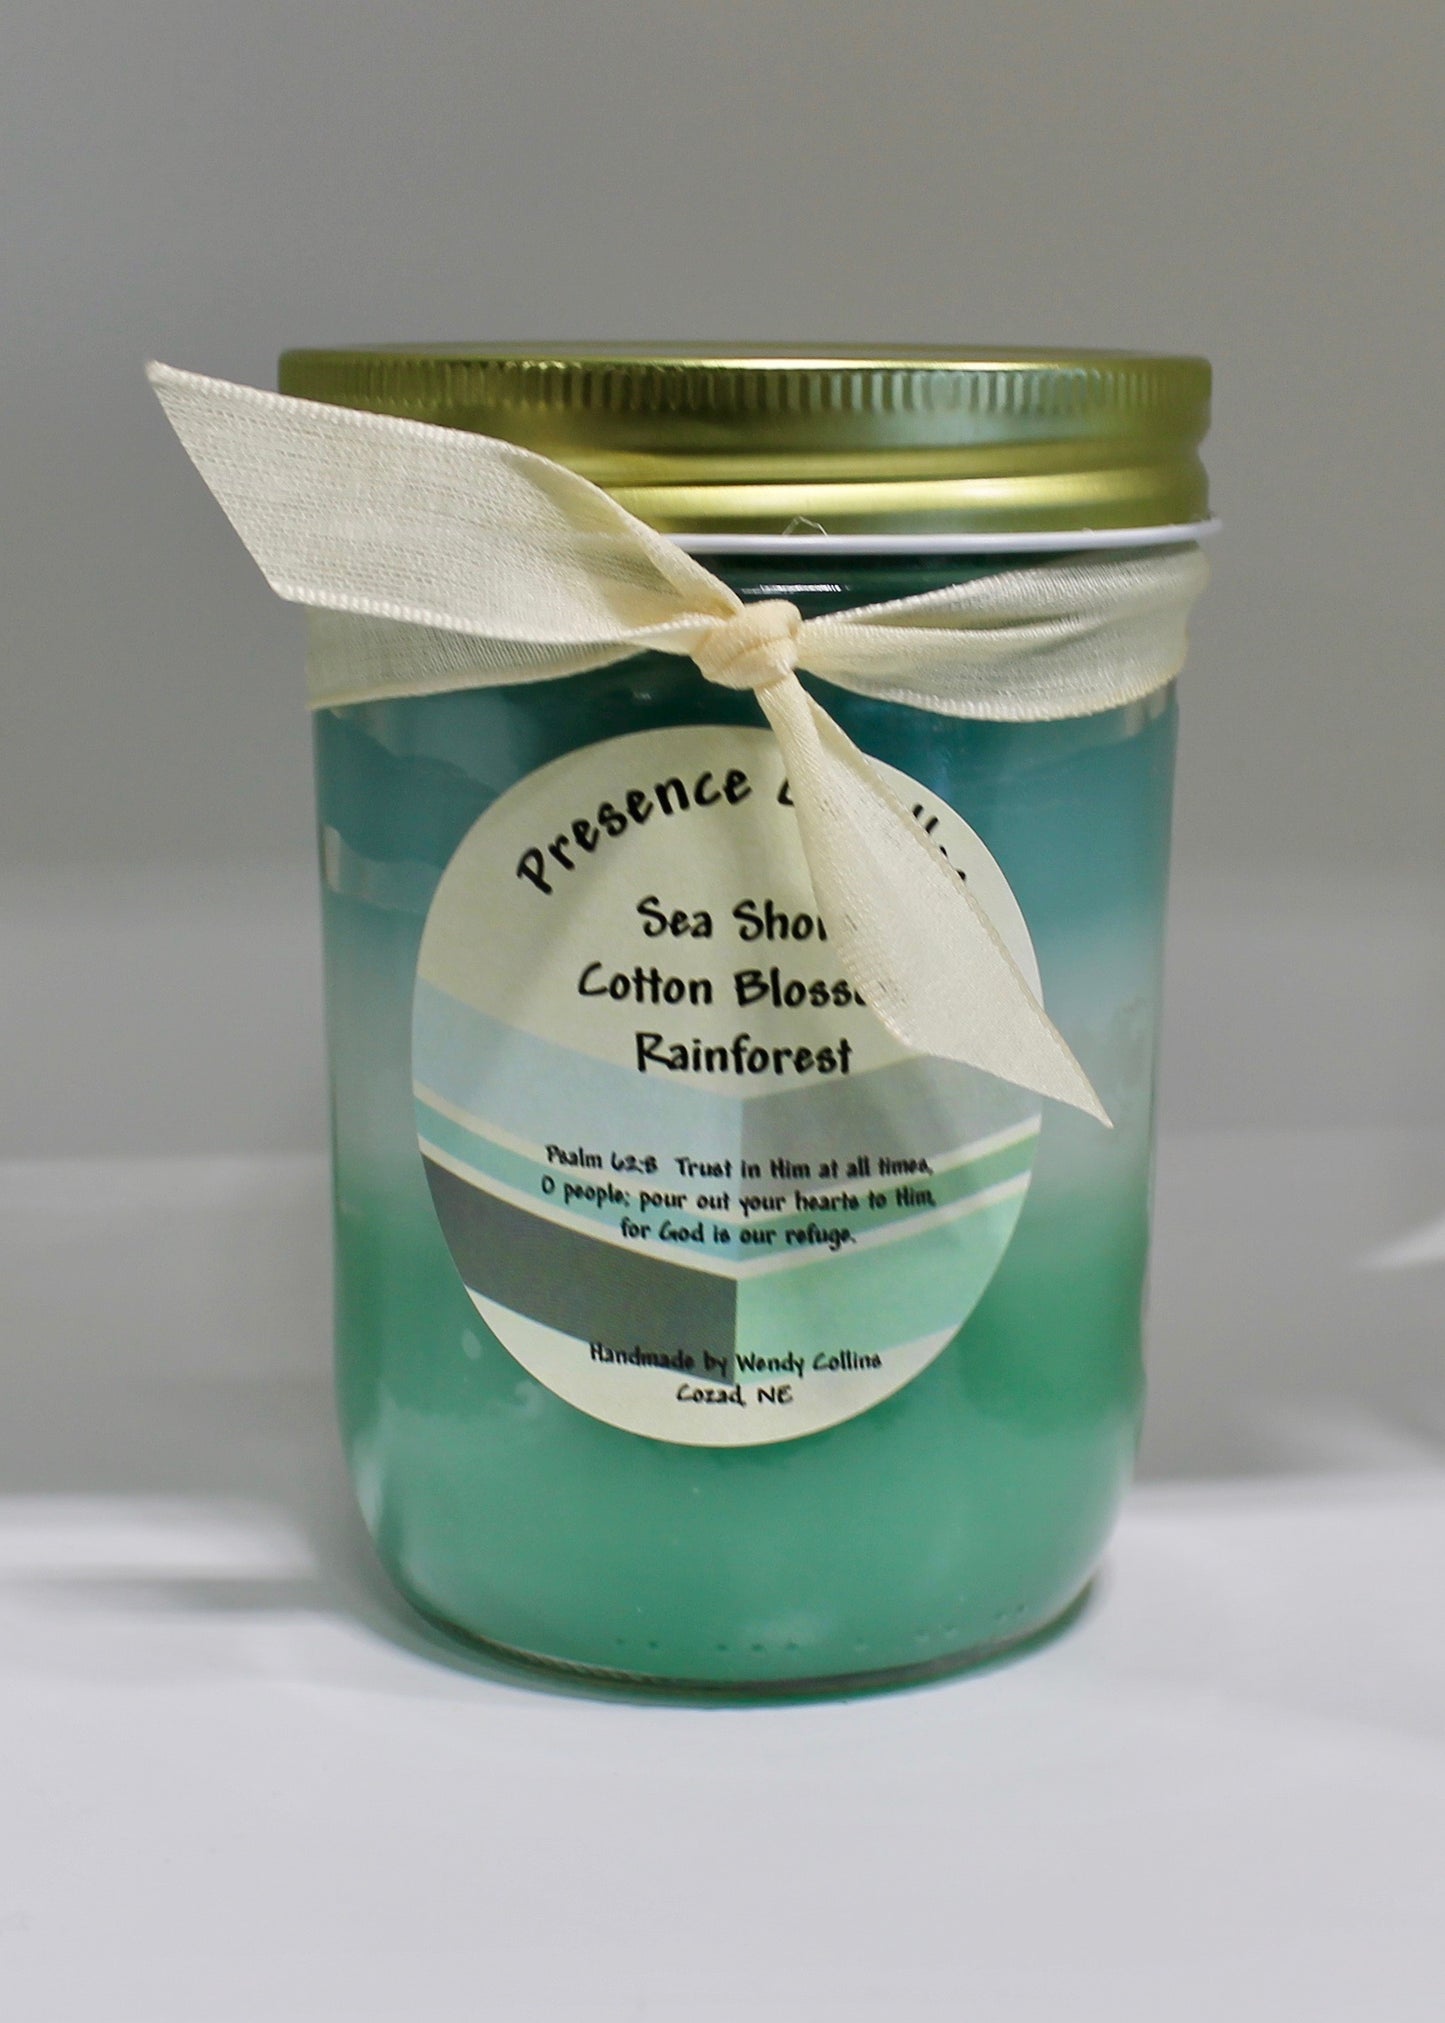 Sea Shore, Spring Blossom, Rainforest Scented Candle